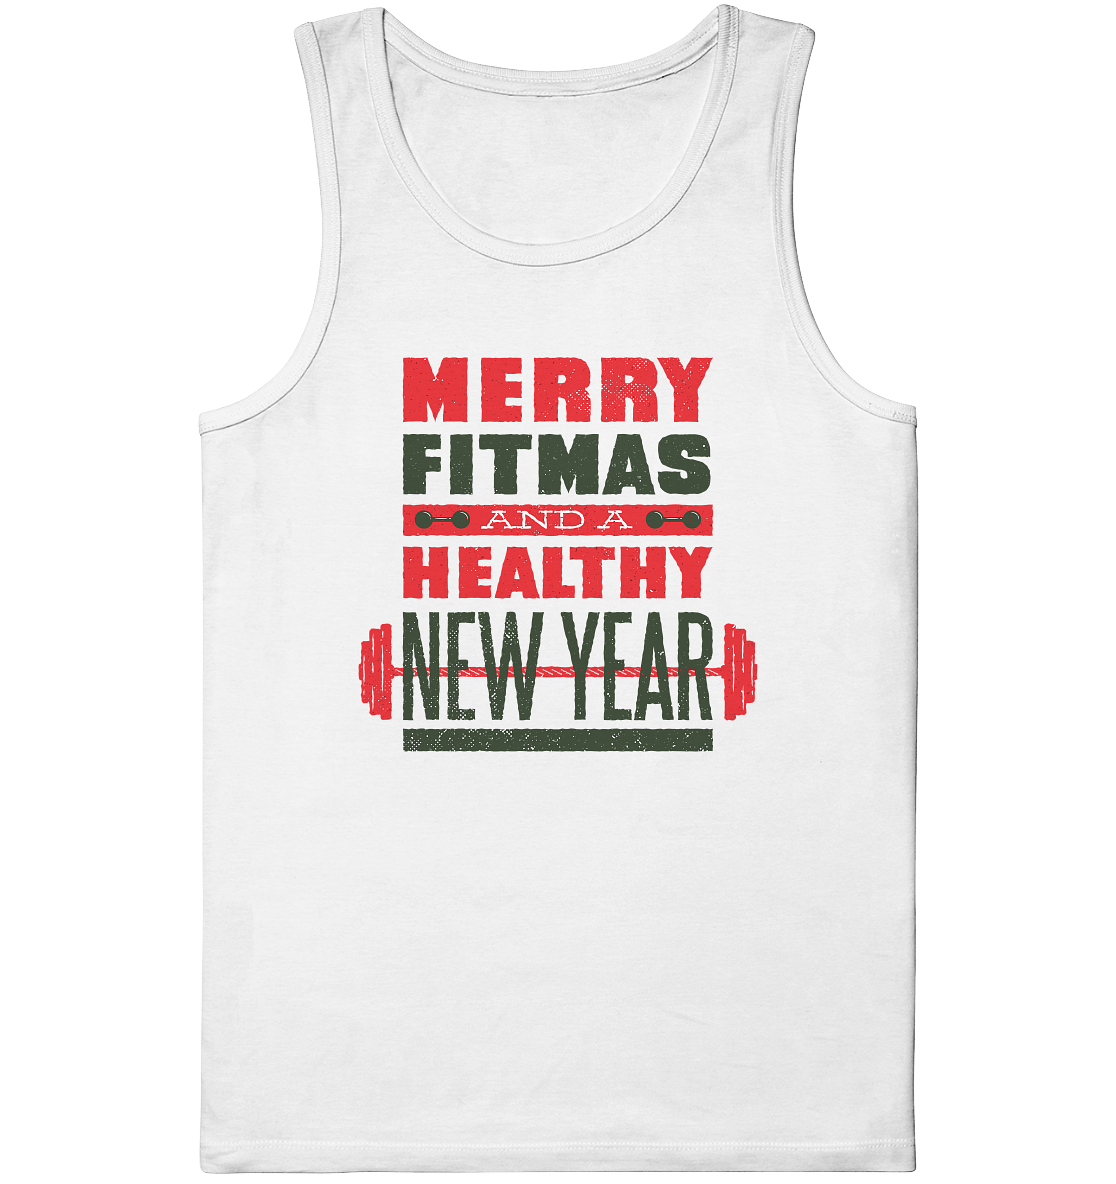 Weihnachtliches Design, Gym, Merry Fitmas and a Healthy New Year - Organic Tank-Top